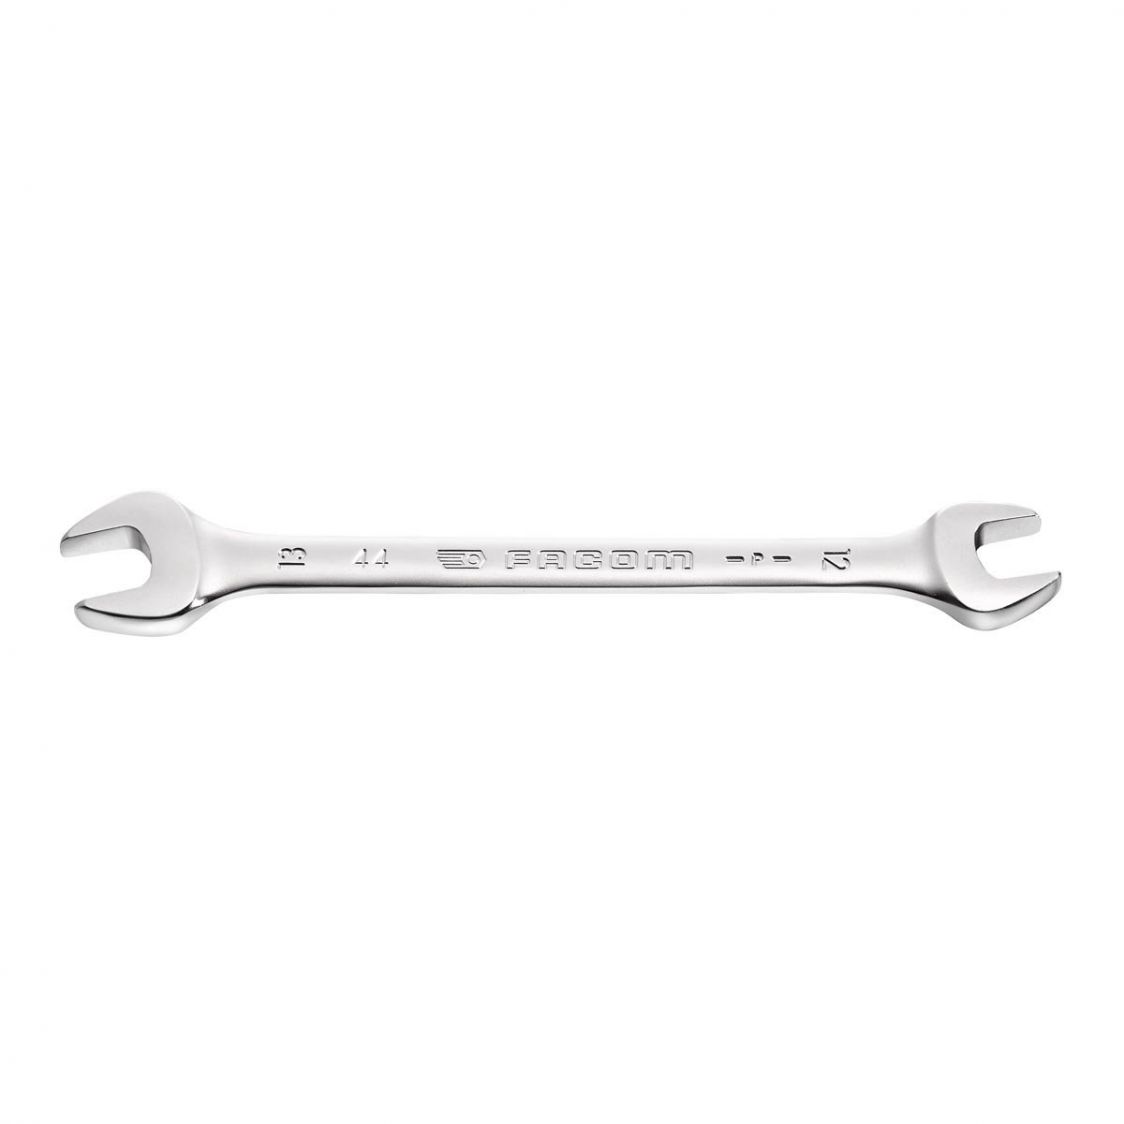 FACOM 44.20X22 - 20x22mm Metric Open Jaw Spanner